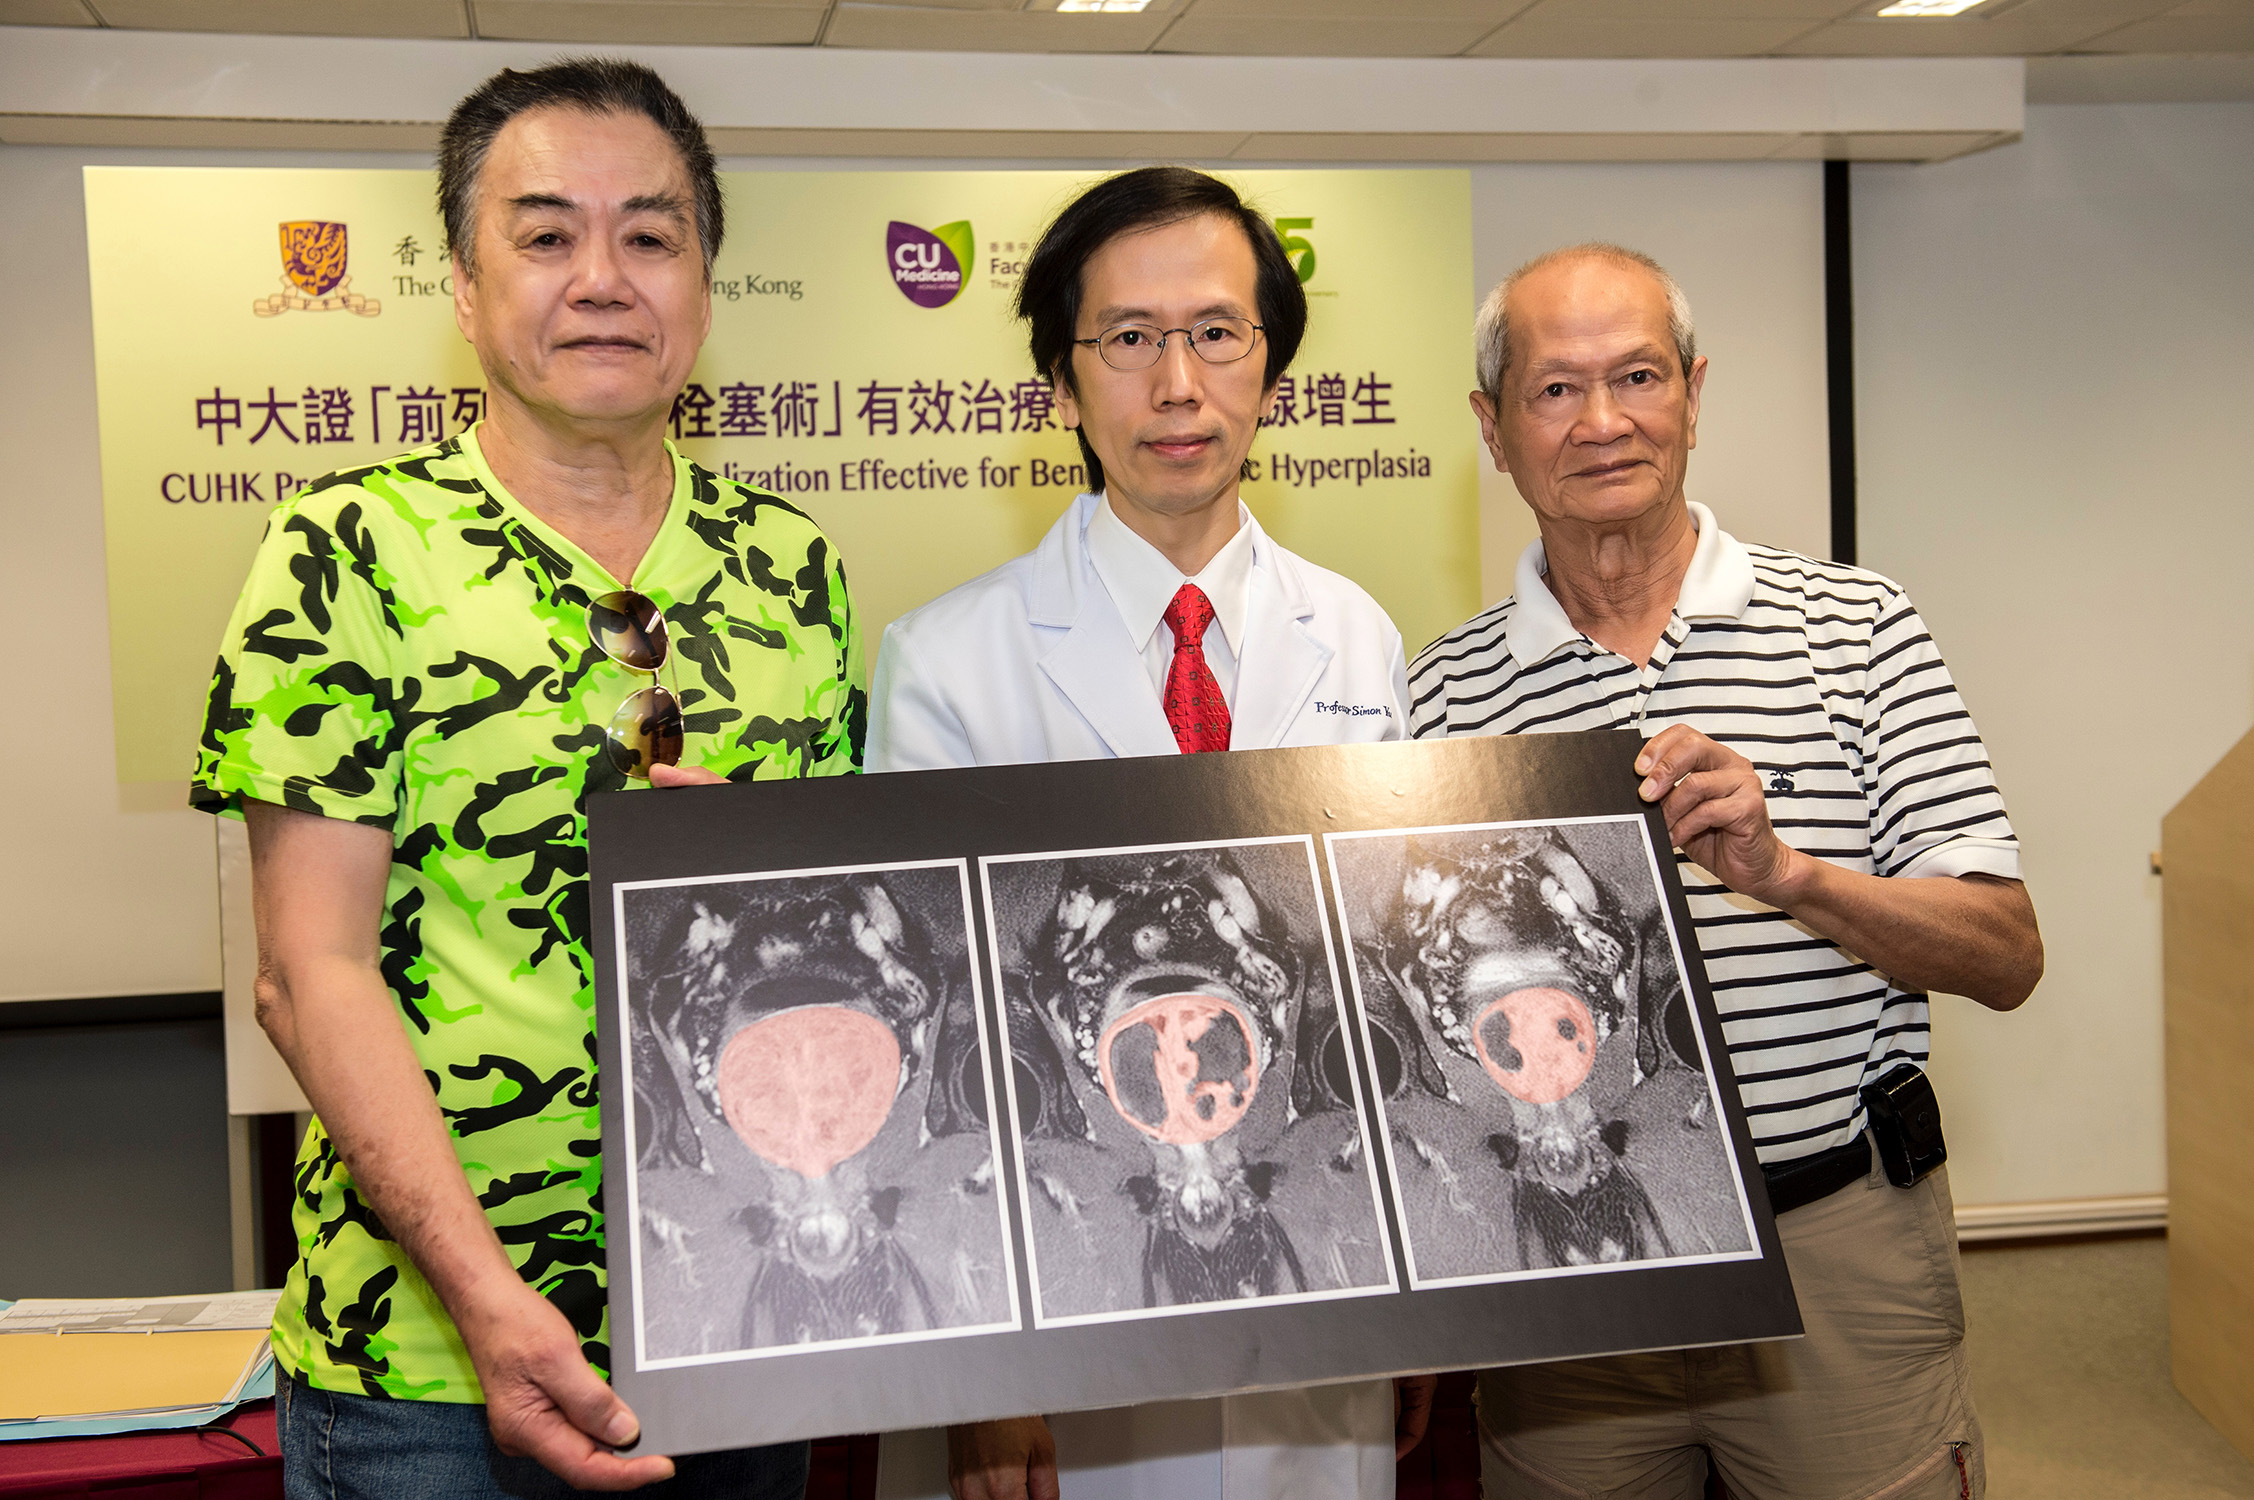 Mr. TSUI (left) and Mr. CHOW (right) have both experienced voiding problems due to BPH. They say PAE has greatly relieved the symptoms and there was no discomfort during the treatment.